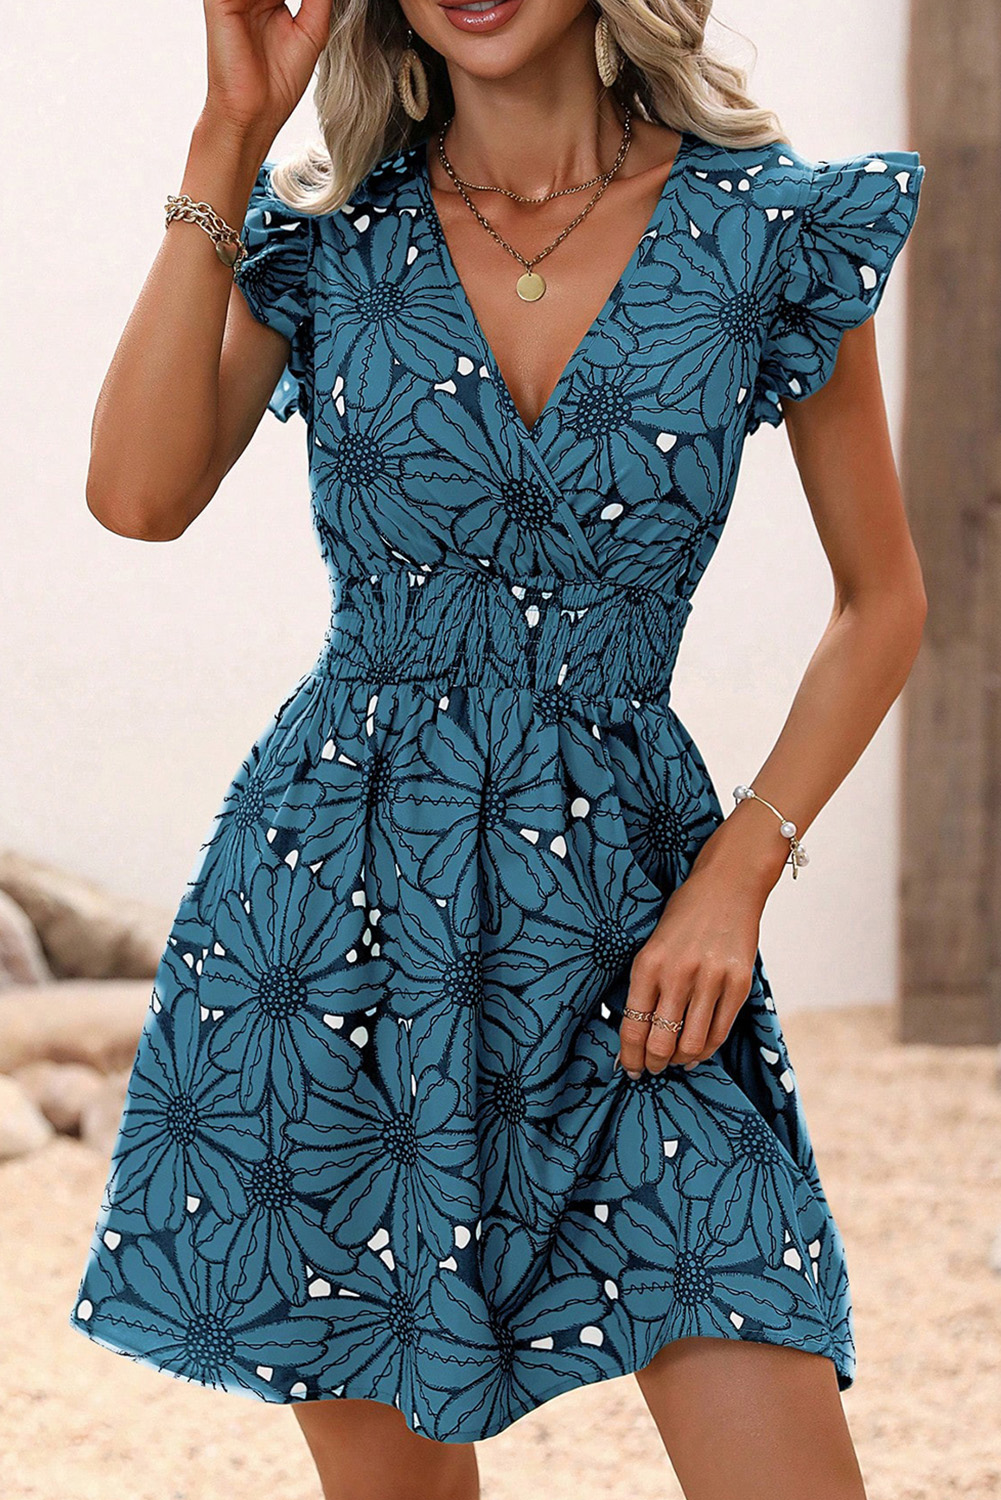 Shewin Wholesale Lady Real Teal Wrapped V Neck Floral Print Ruffle Short Sleeve DRESS